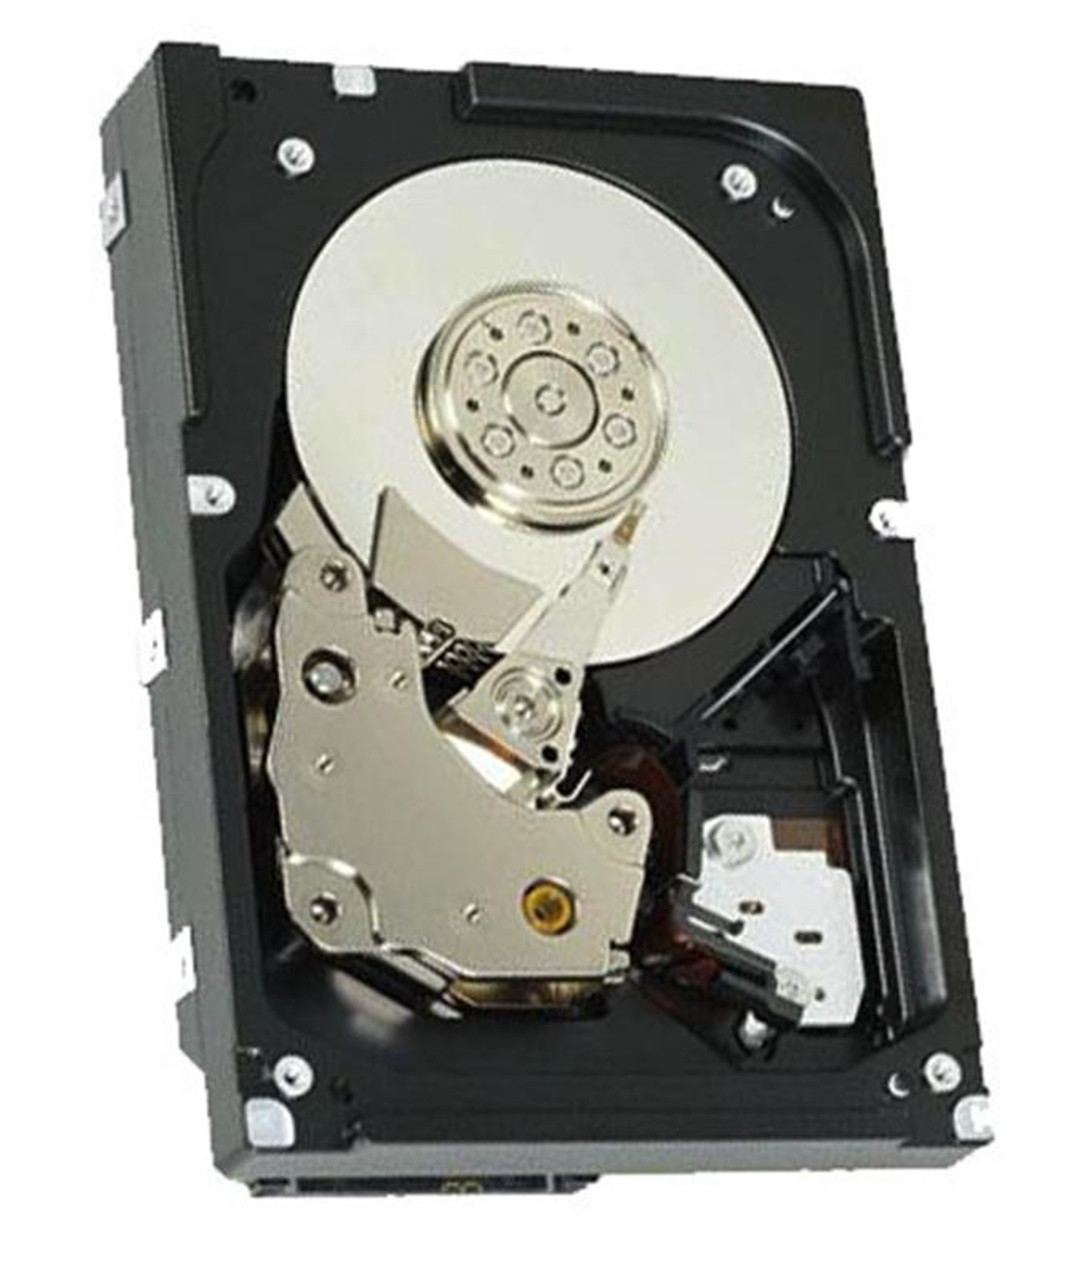 49Y6169 - IBM 146GB 15000RPM SAS 6GB/s 2.5-inch SFF G2 Hot Swapable Hard Drive with Tray